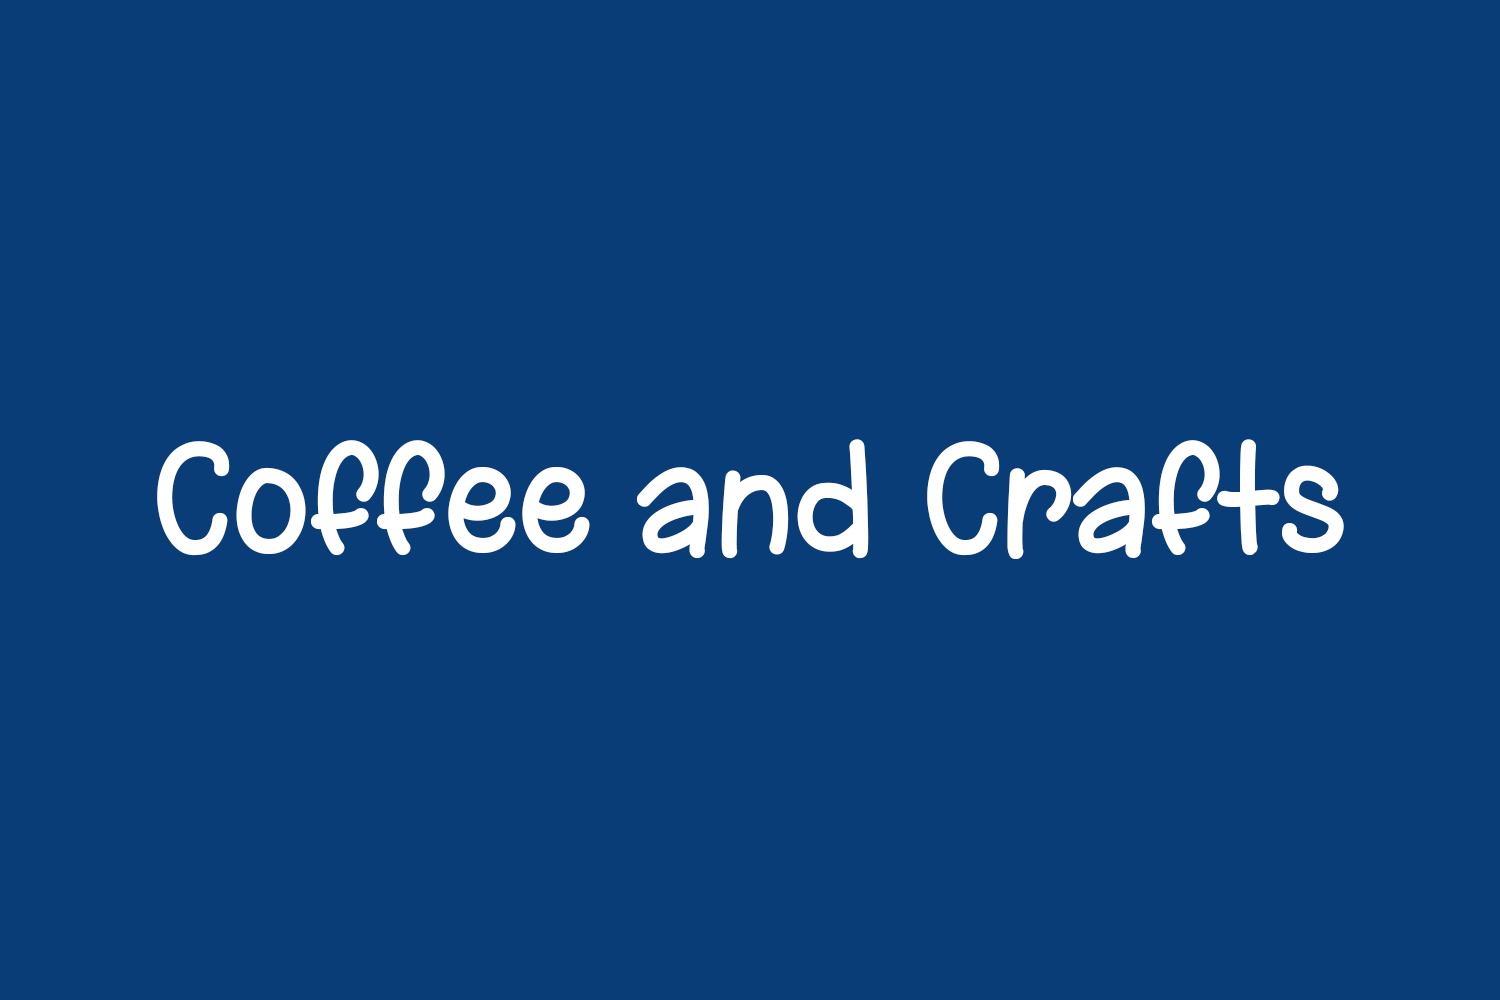 Coffee and Crafts Free Font